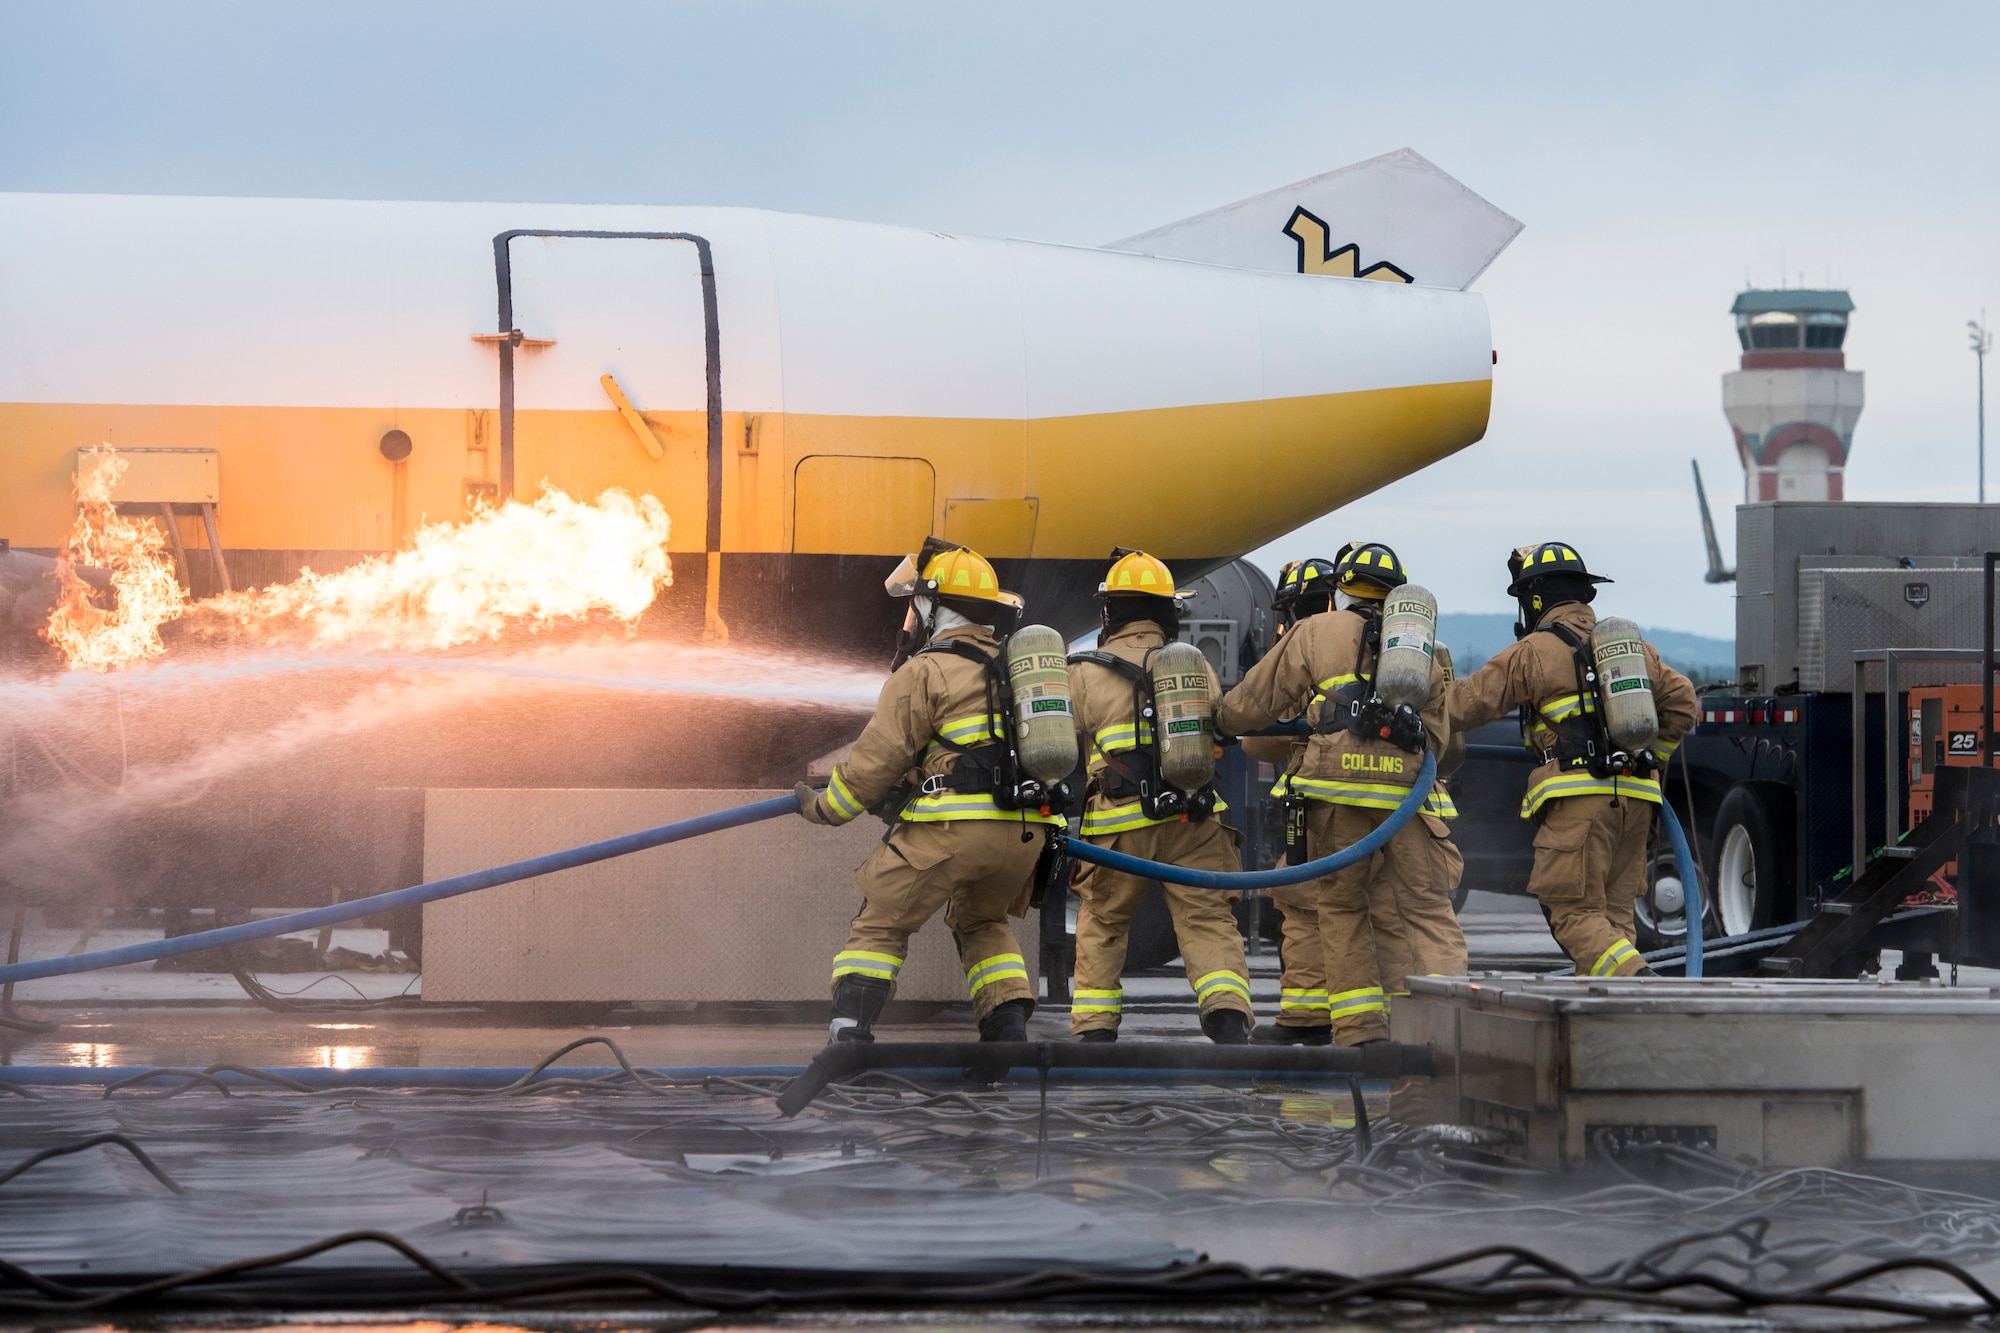 Firefighters from the 167th Airlift Wing, Martinsburg, W. Va., respond to a simulated aircraft fire as part of their Federal Aviation Administration Part 139 Live Fire Training, Oct. 14, 2018. (U.S. Air National Guard photo by Senior Airman Edward Michon)